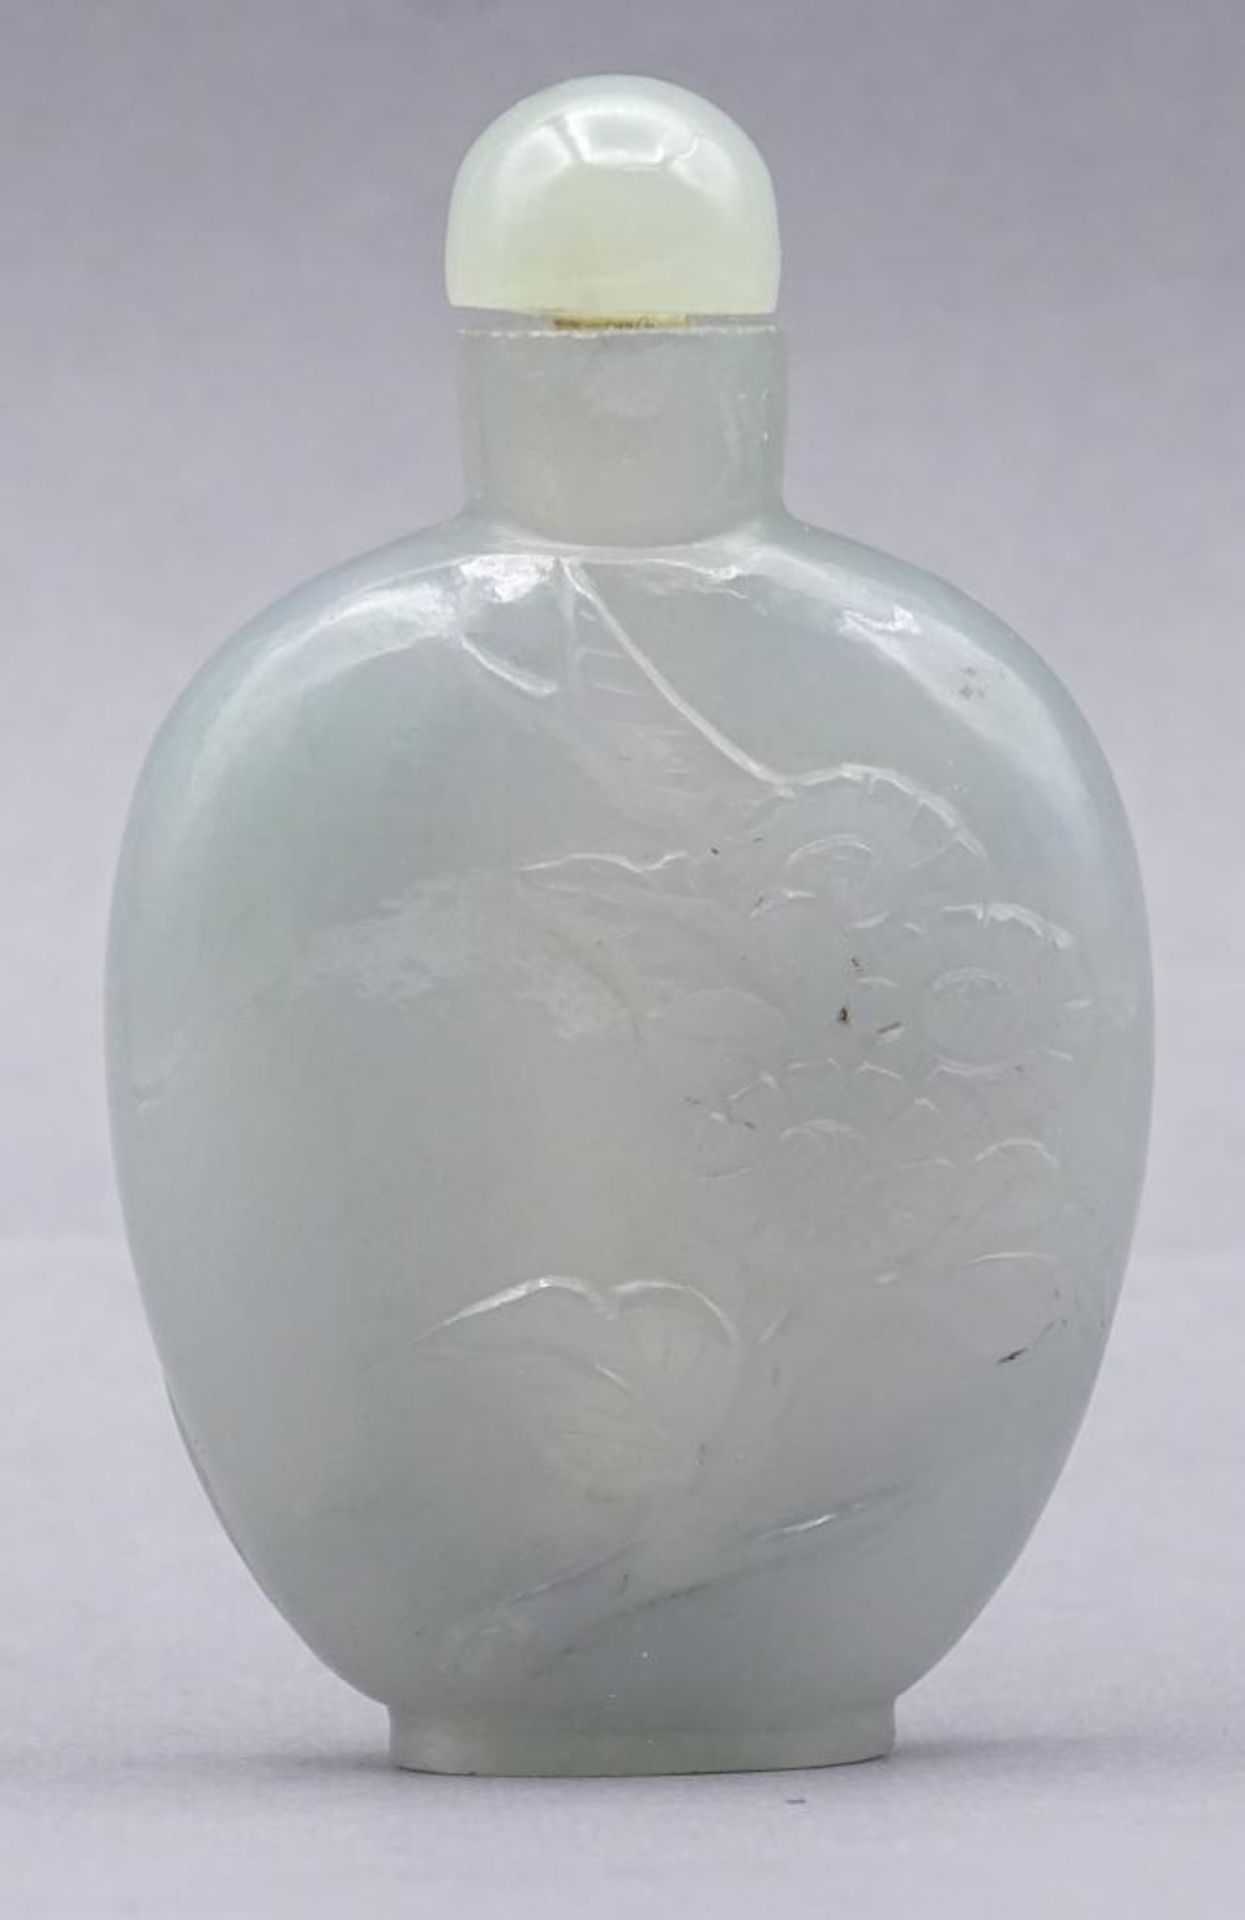 kl. Snuff Bottle,wohl Jade, China, h-6 cm, B-3,5 cm- - -22.61 % buyer's premium on the hammer - Image 2 of 8